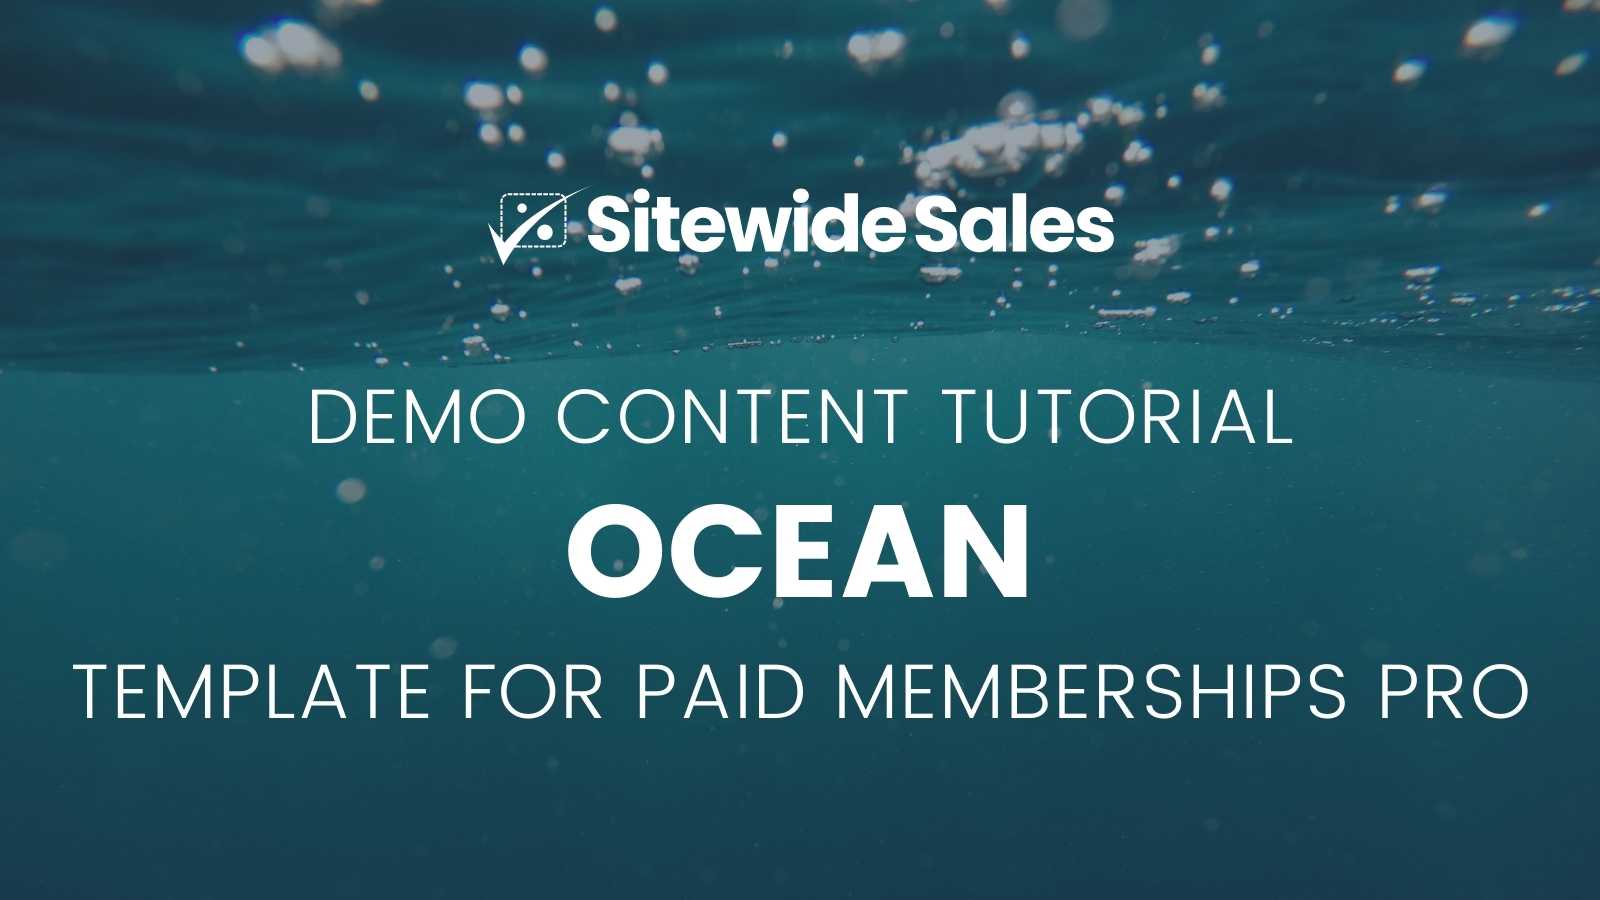 Ocean Template for Paid Memberships Pro: Sitewide Sale Demo Content